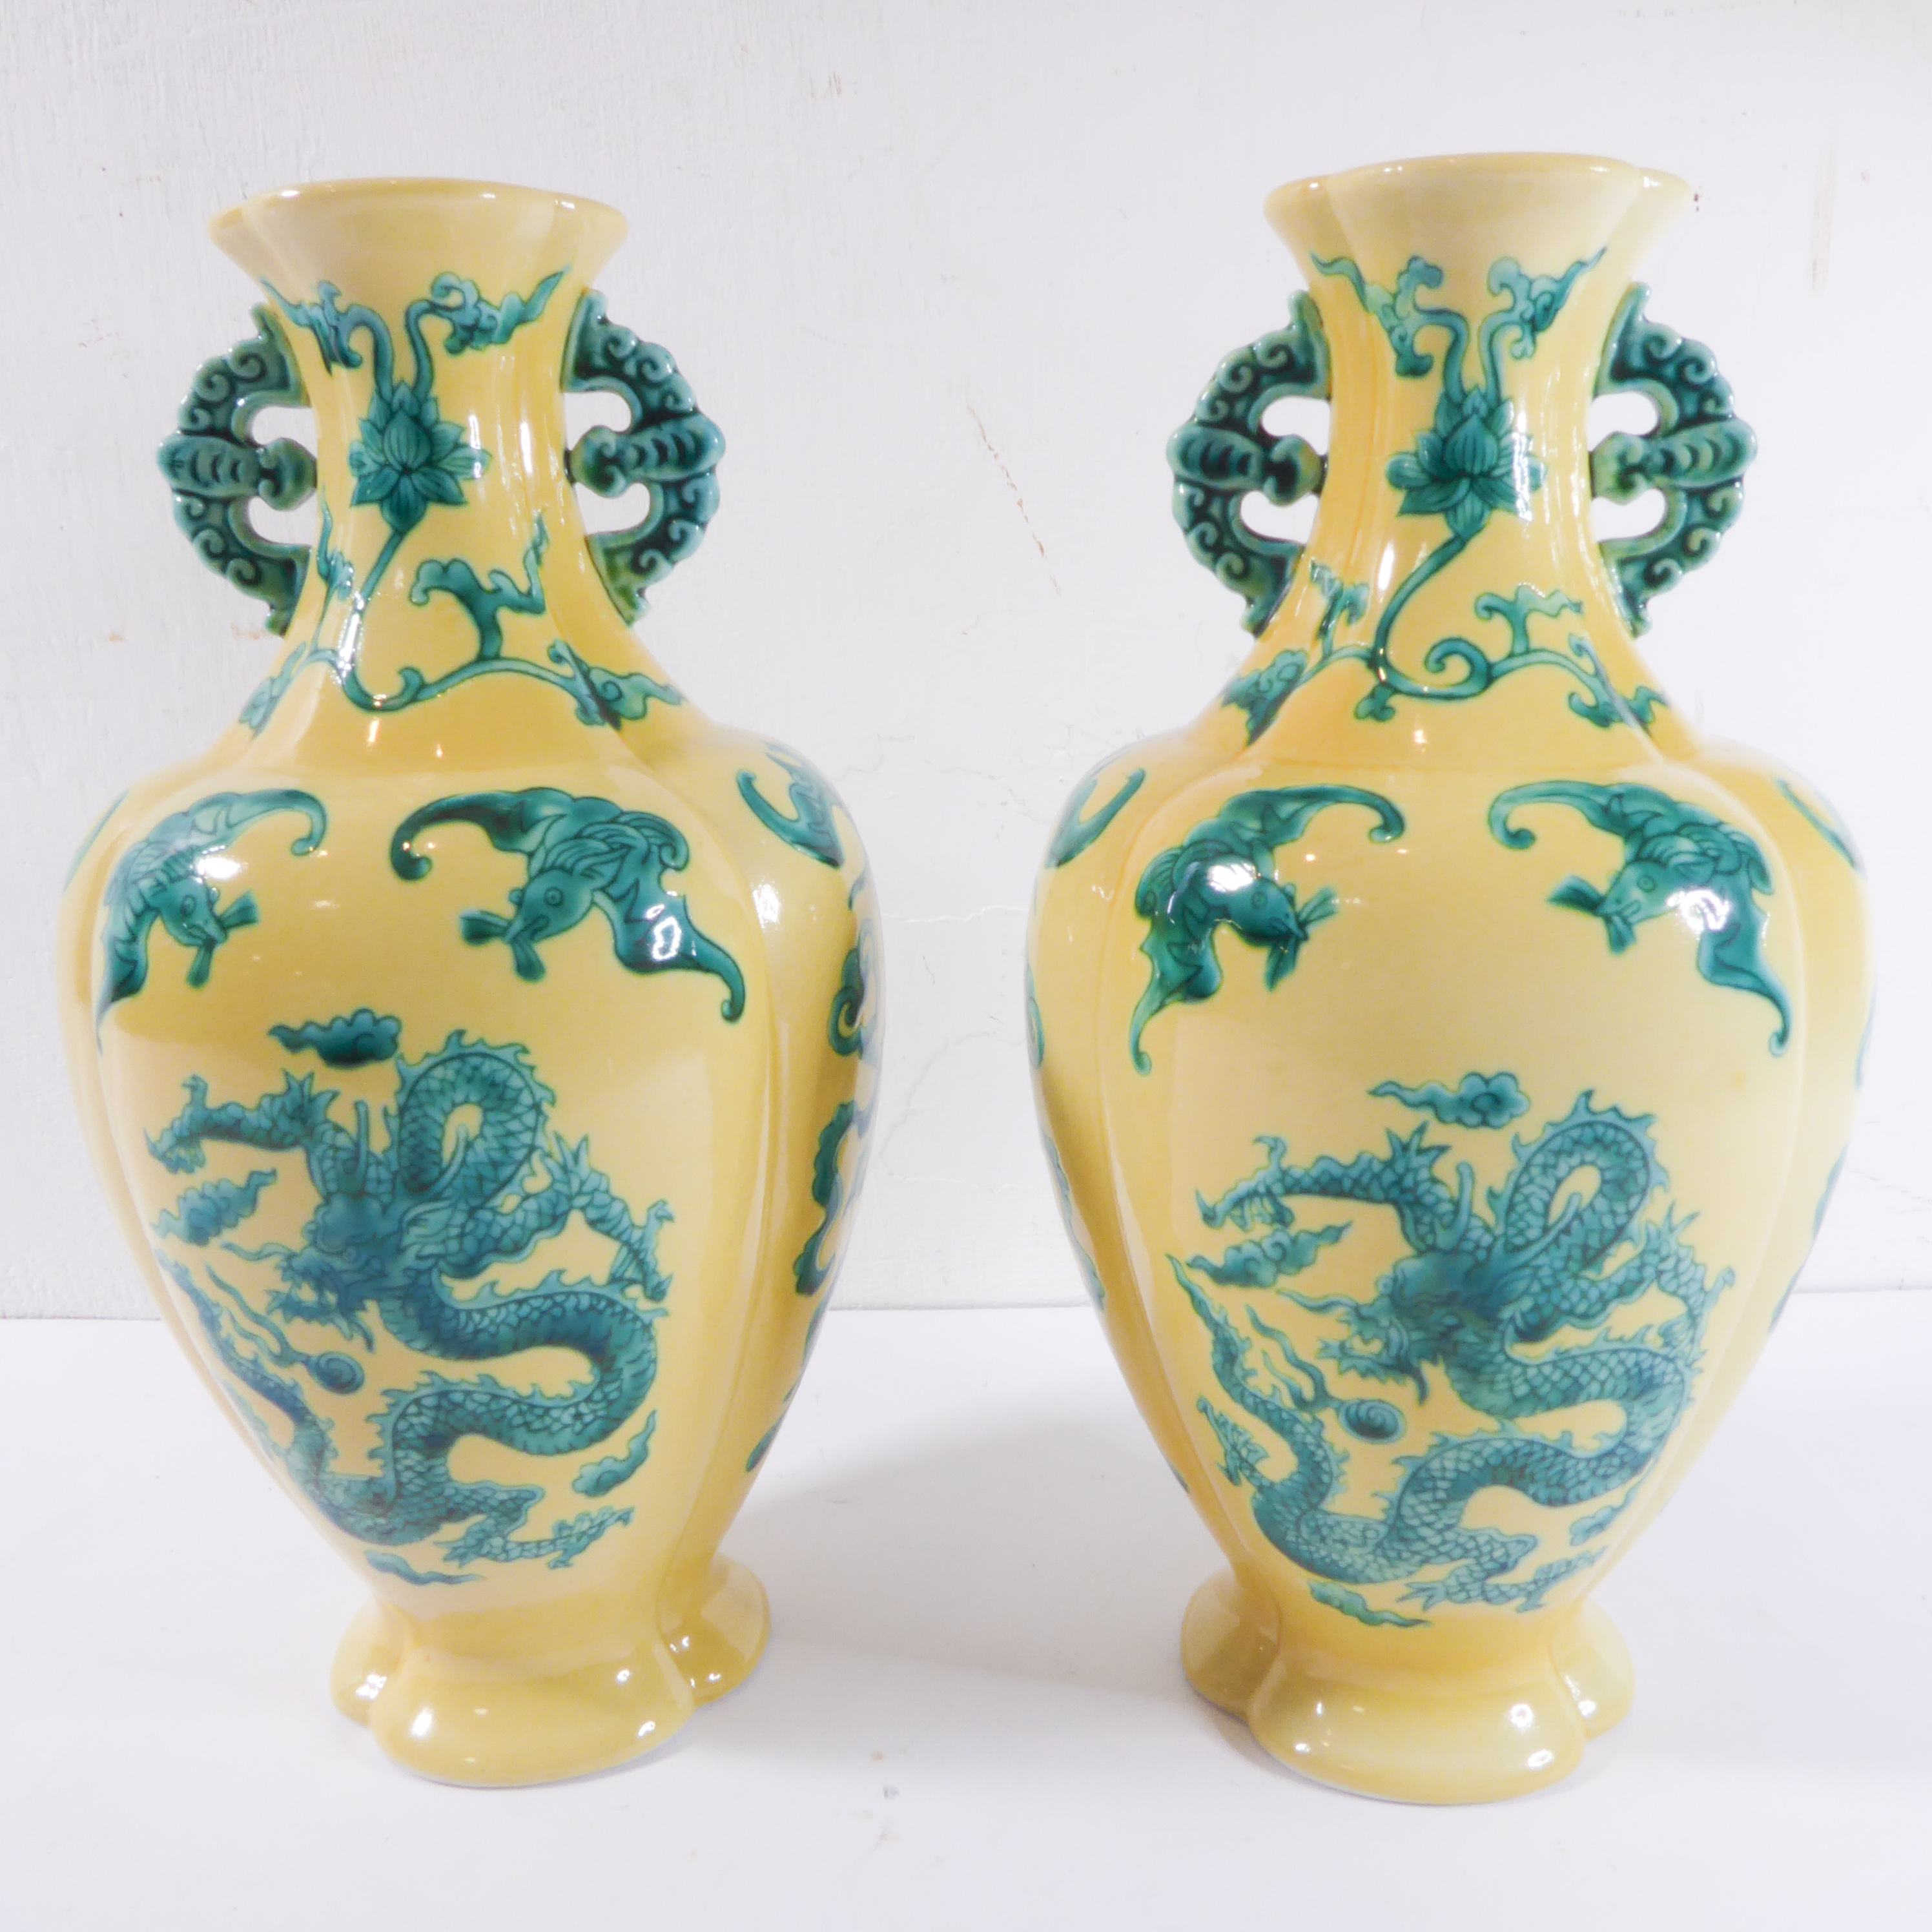 A pair of 20th century ornate hand-painted Chinese vases - Image 2 of 4